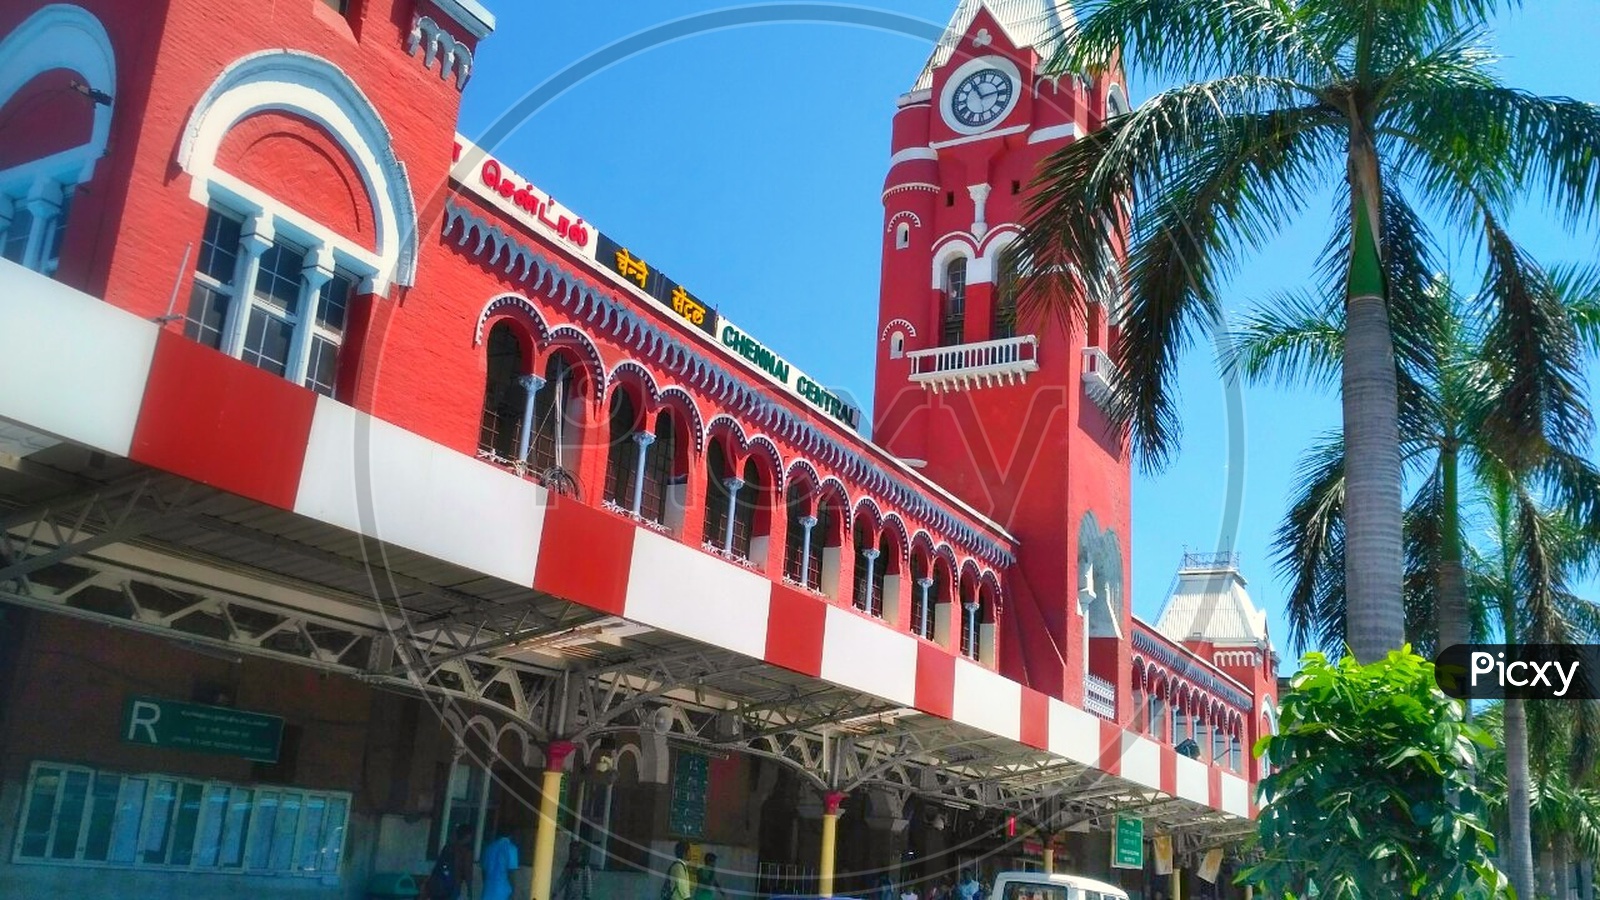 Different view of Chennai railway station